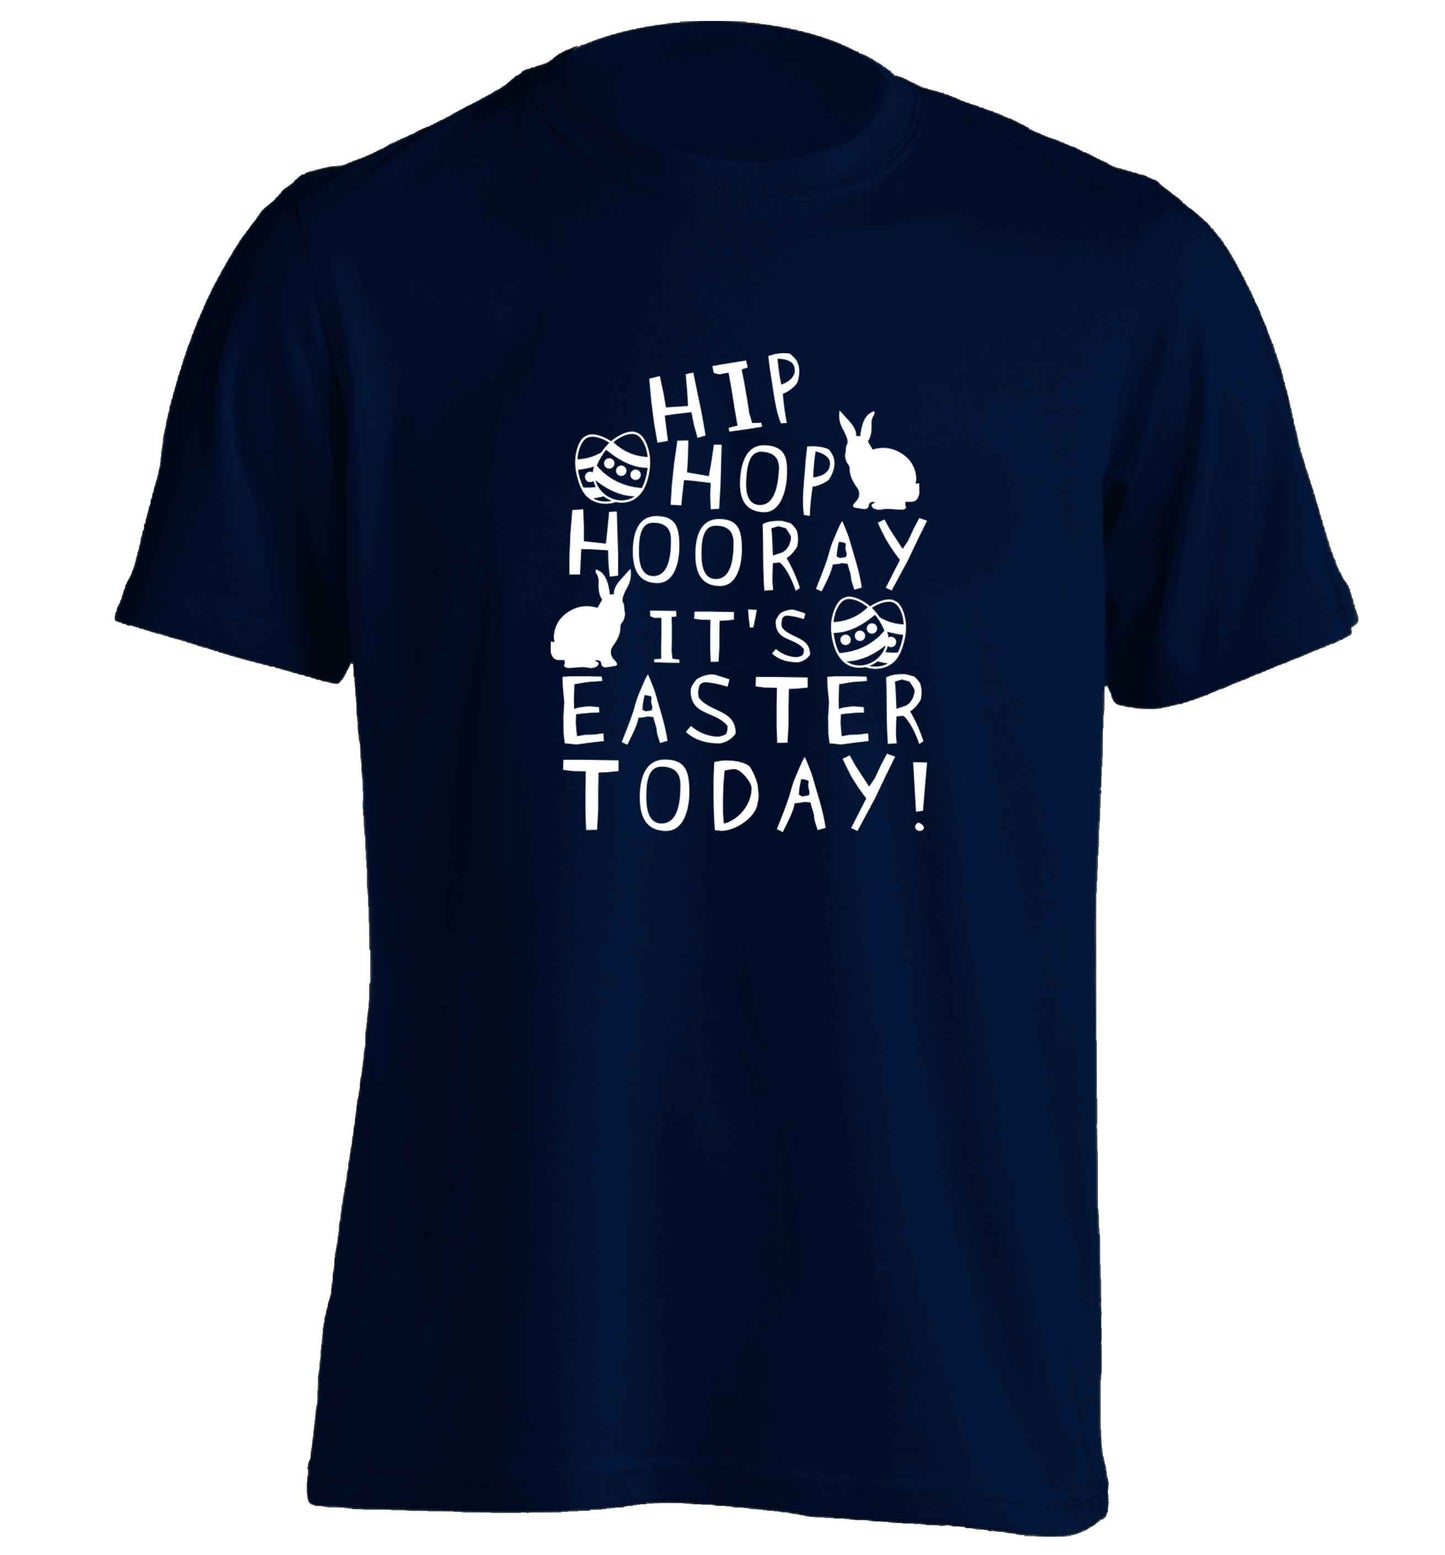 Hip hip hooray it's Easter today! adults unisex navy Tshirt 2XL